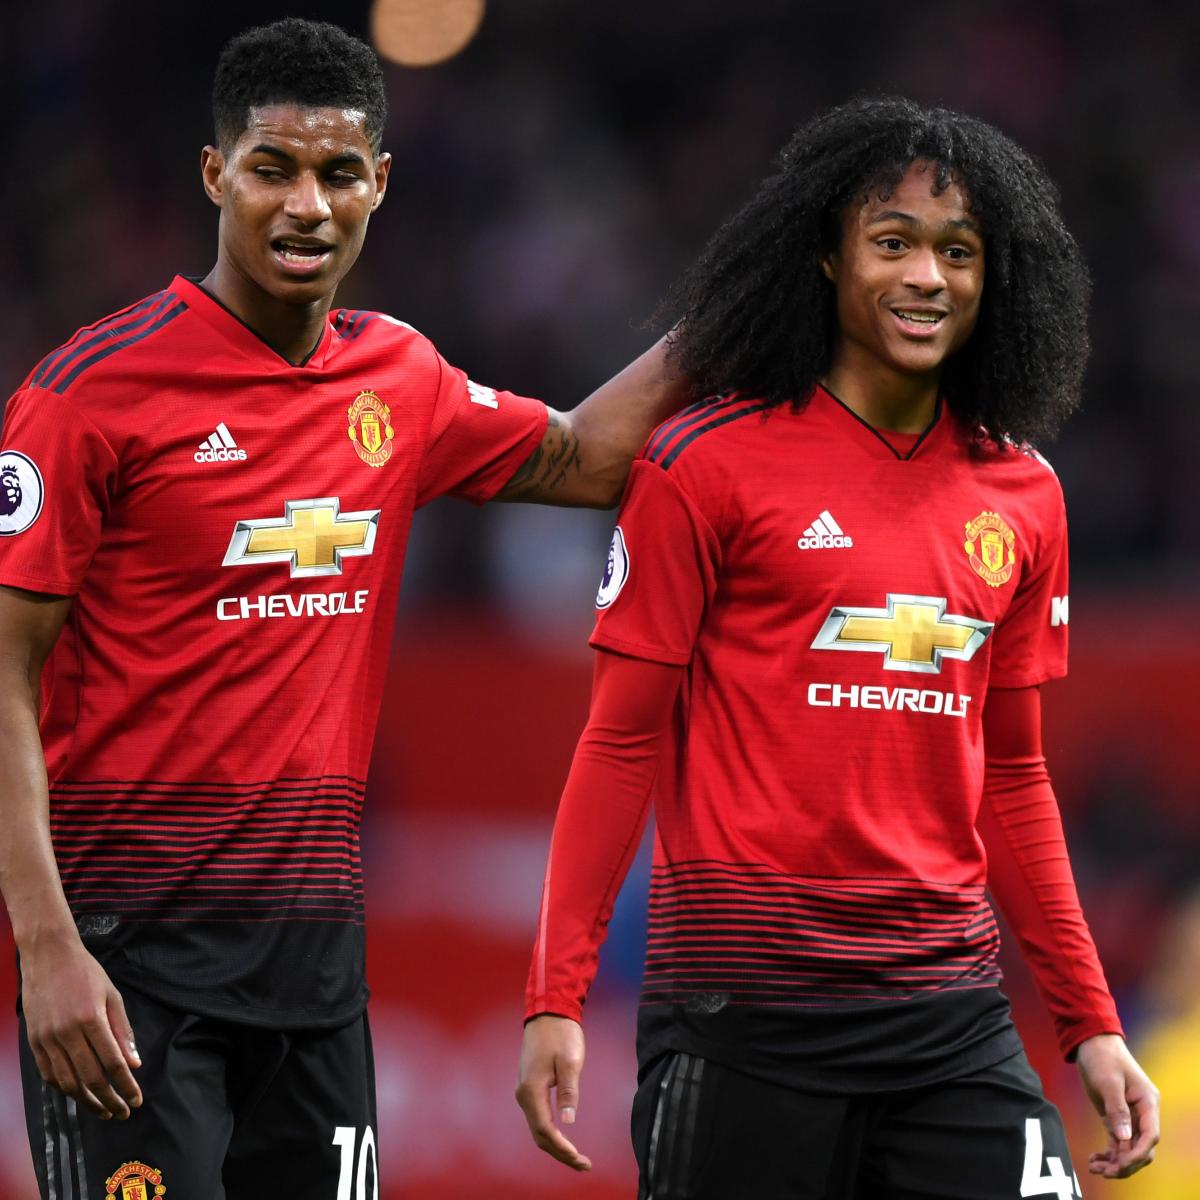 Tahith Chong: A Loan Is Possible, but 'I Only Think About Manchester United'